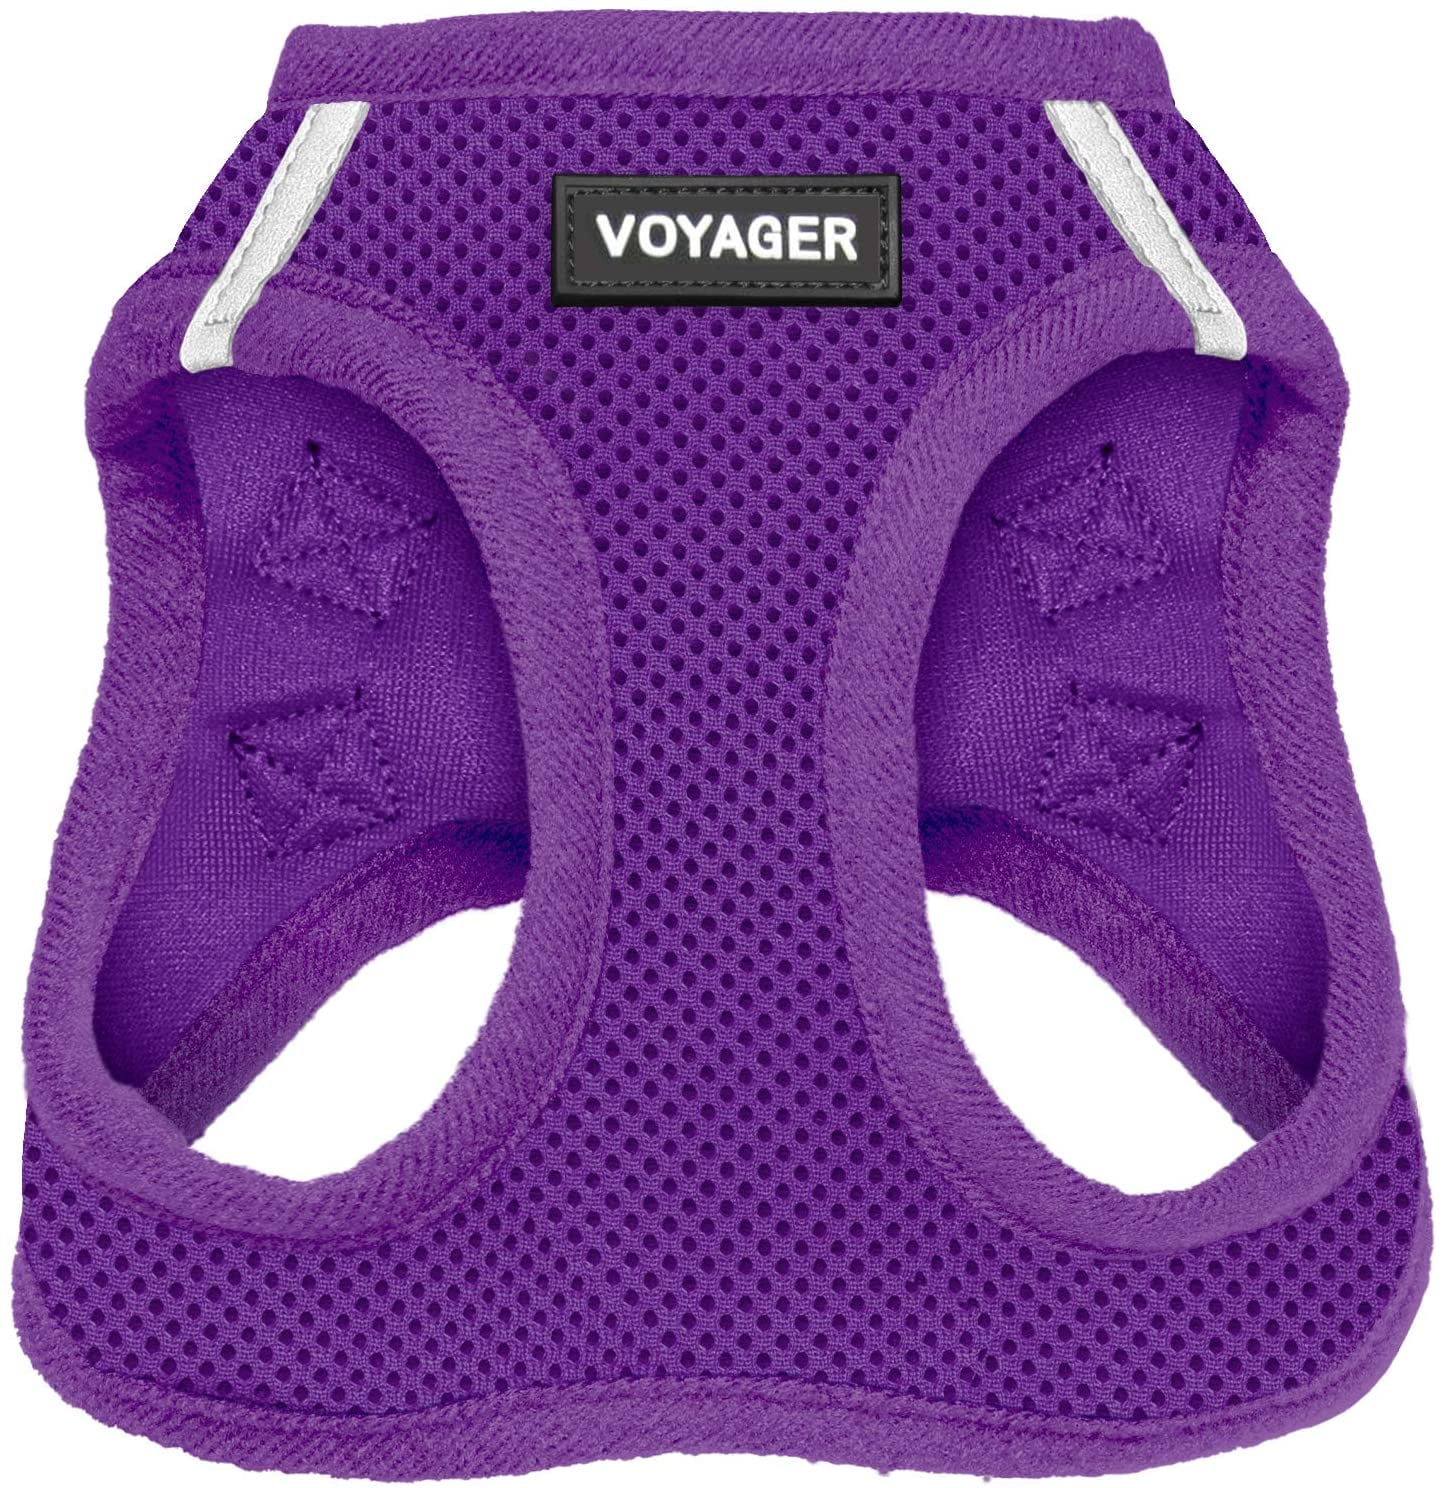 Voyager Step-in Air Dog Harness All Weather Mesh Step in Vest Harness for Small Dogs and Cats by Best Pet Supplies